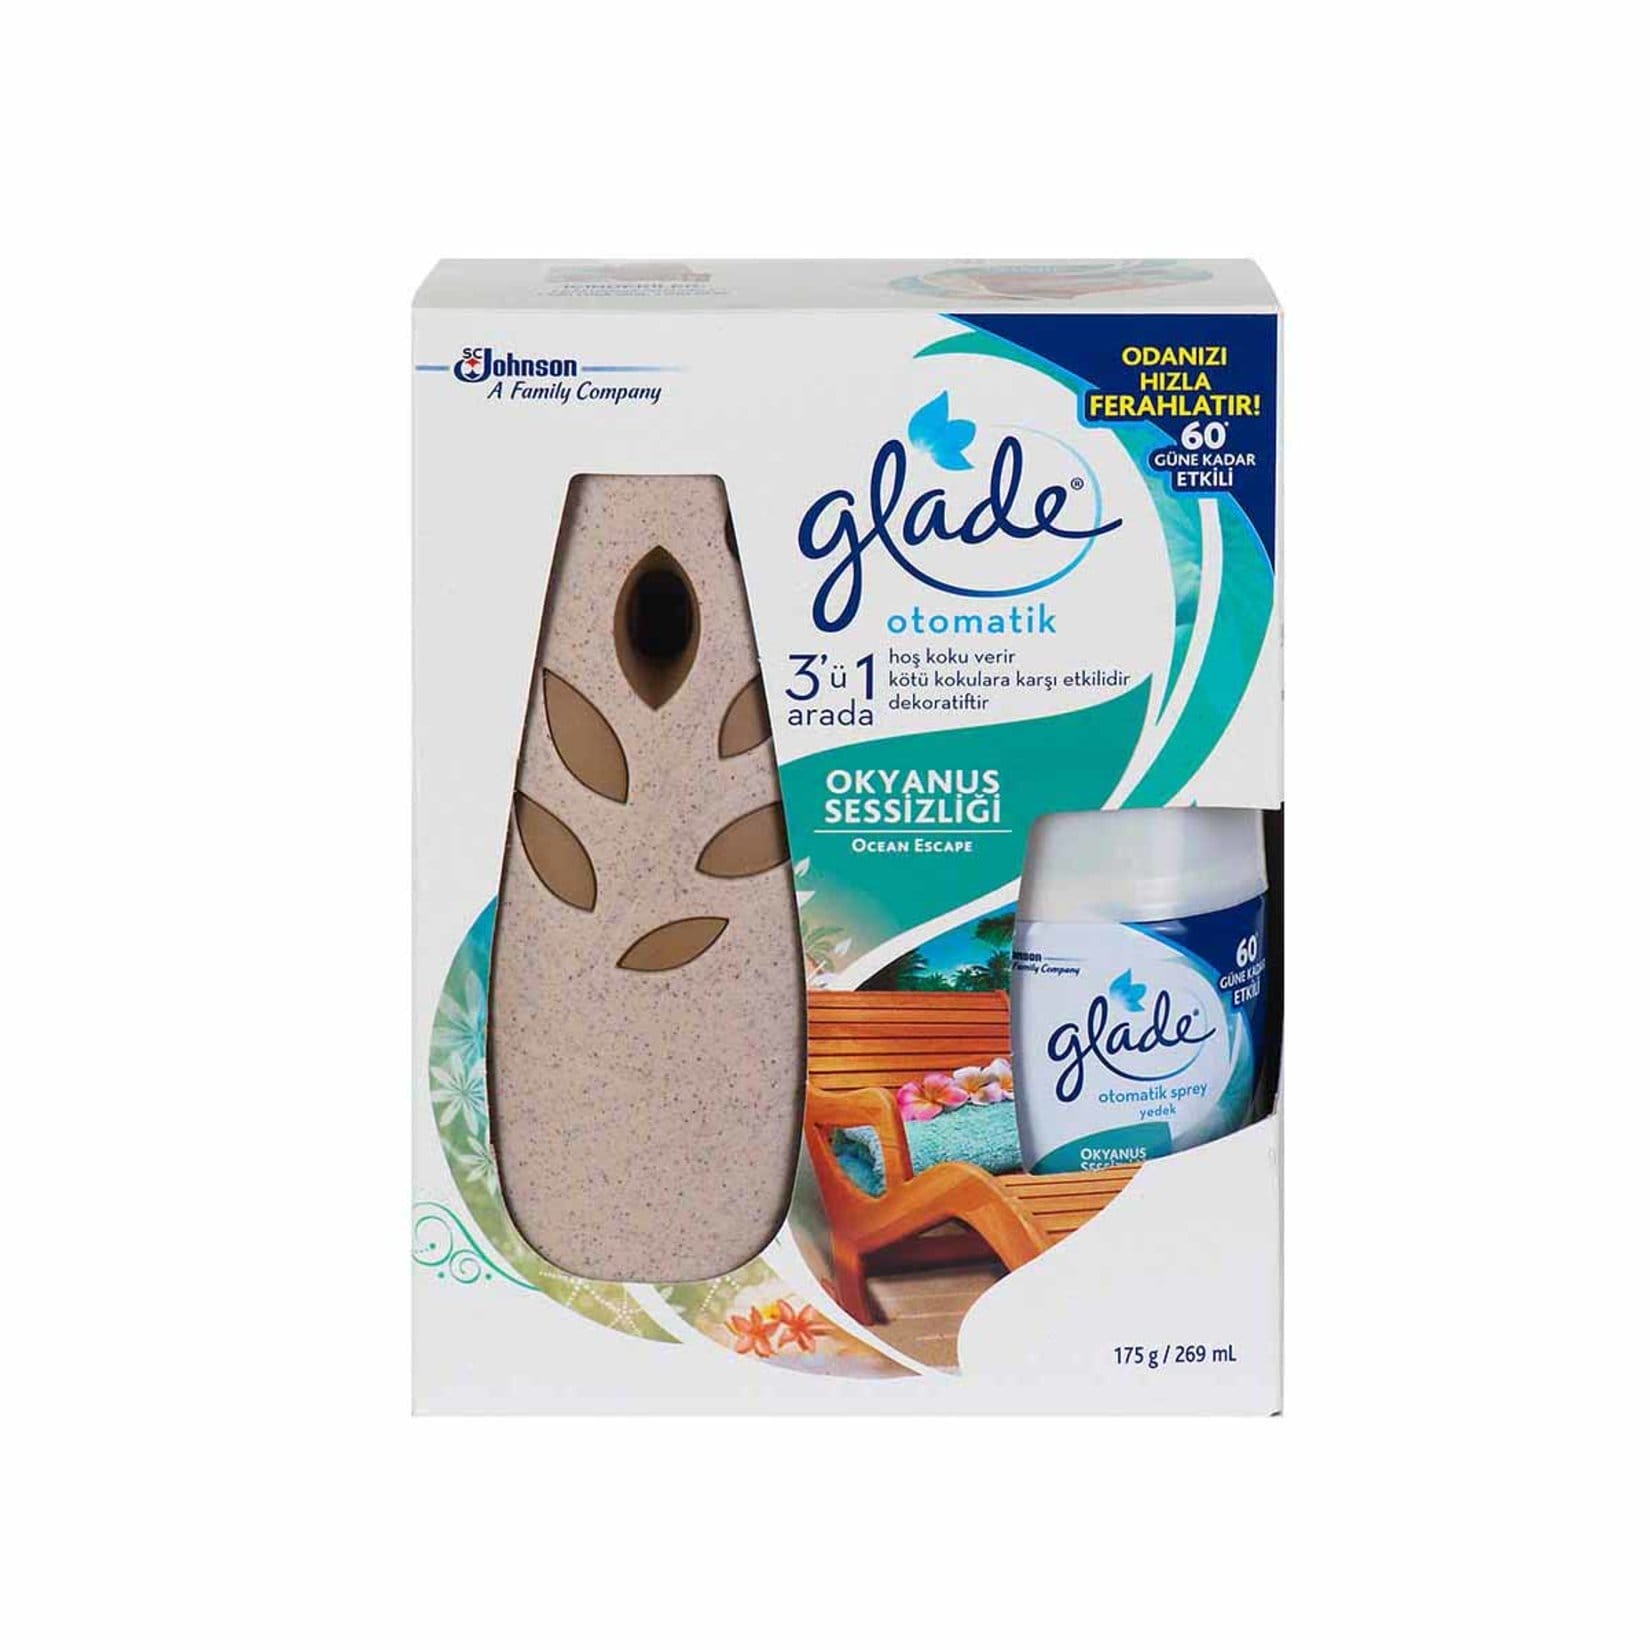 Glade Automatic System Ocean Silience+ 1 Refill 269 ml 